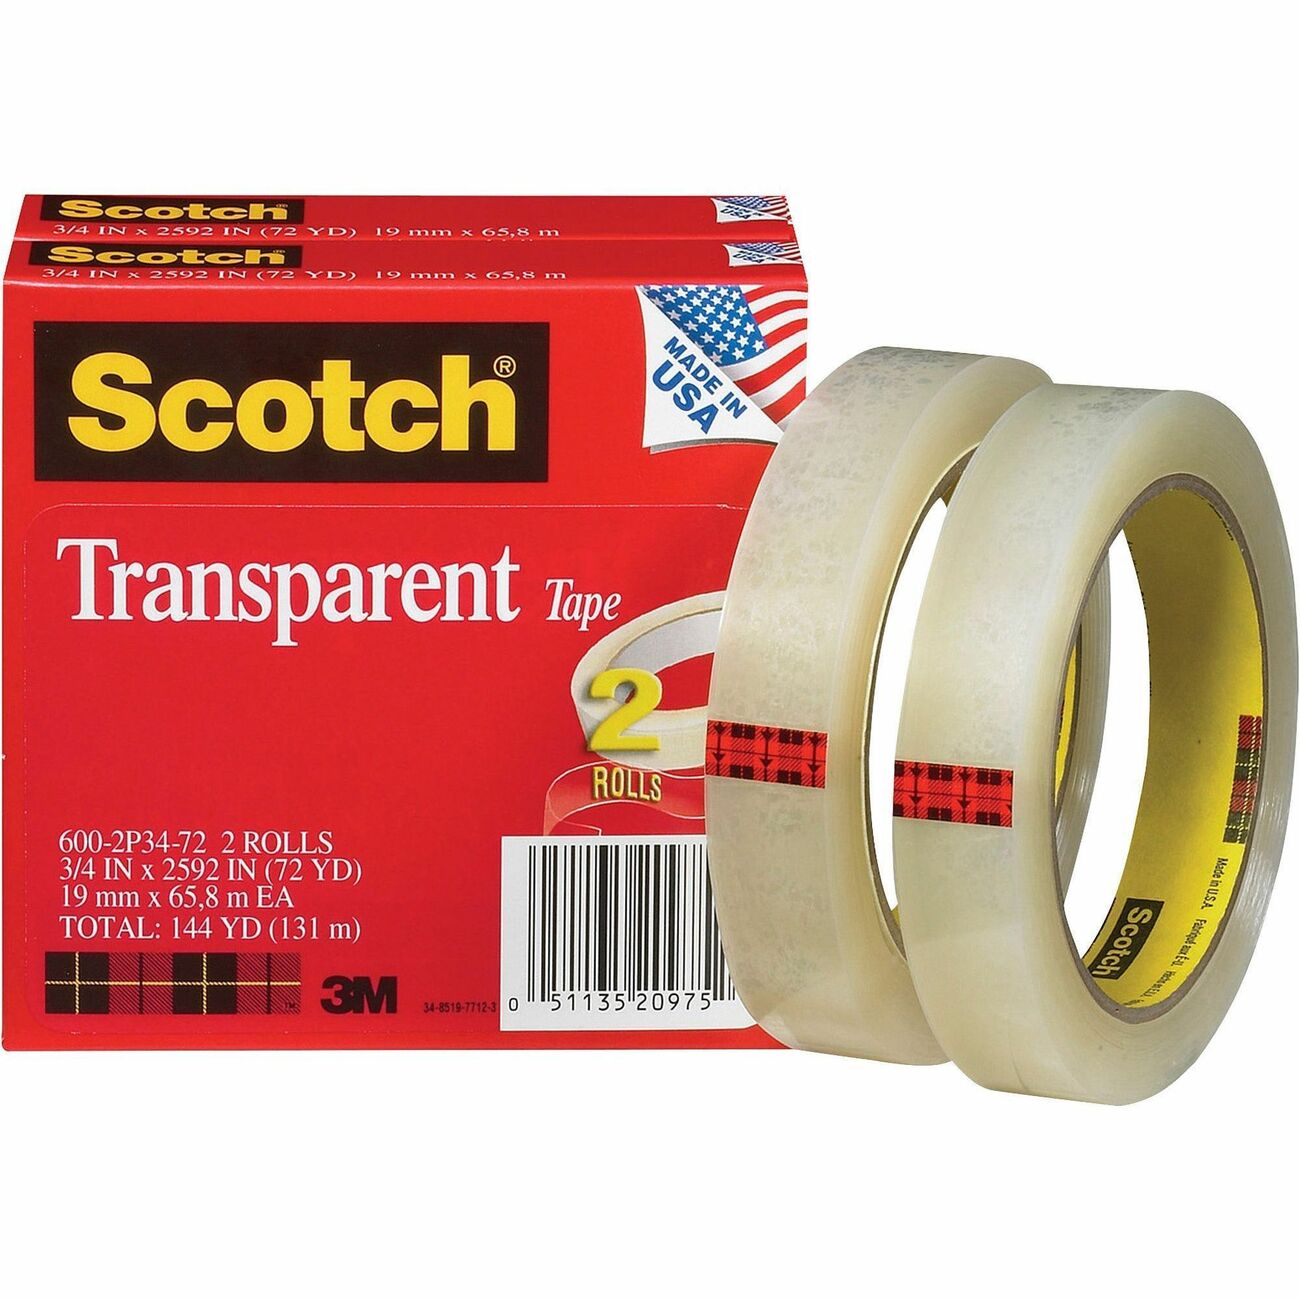 Highland Invisible Tape, 1 x 2592, 3 Core